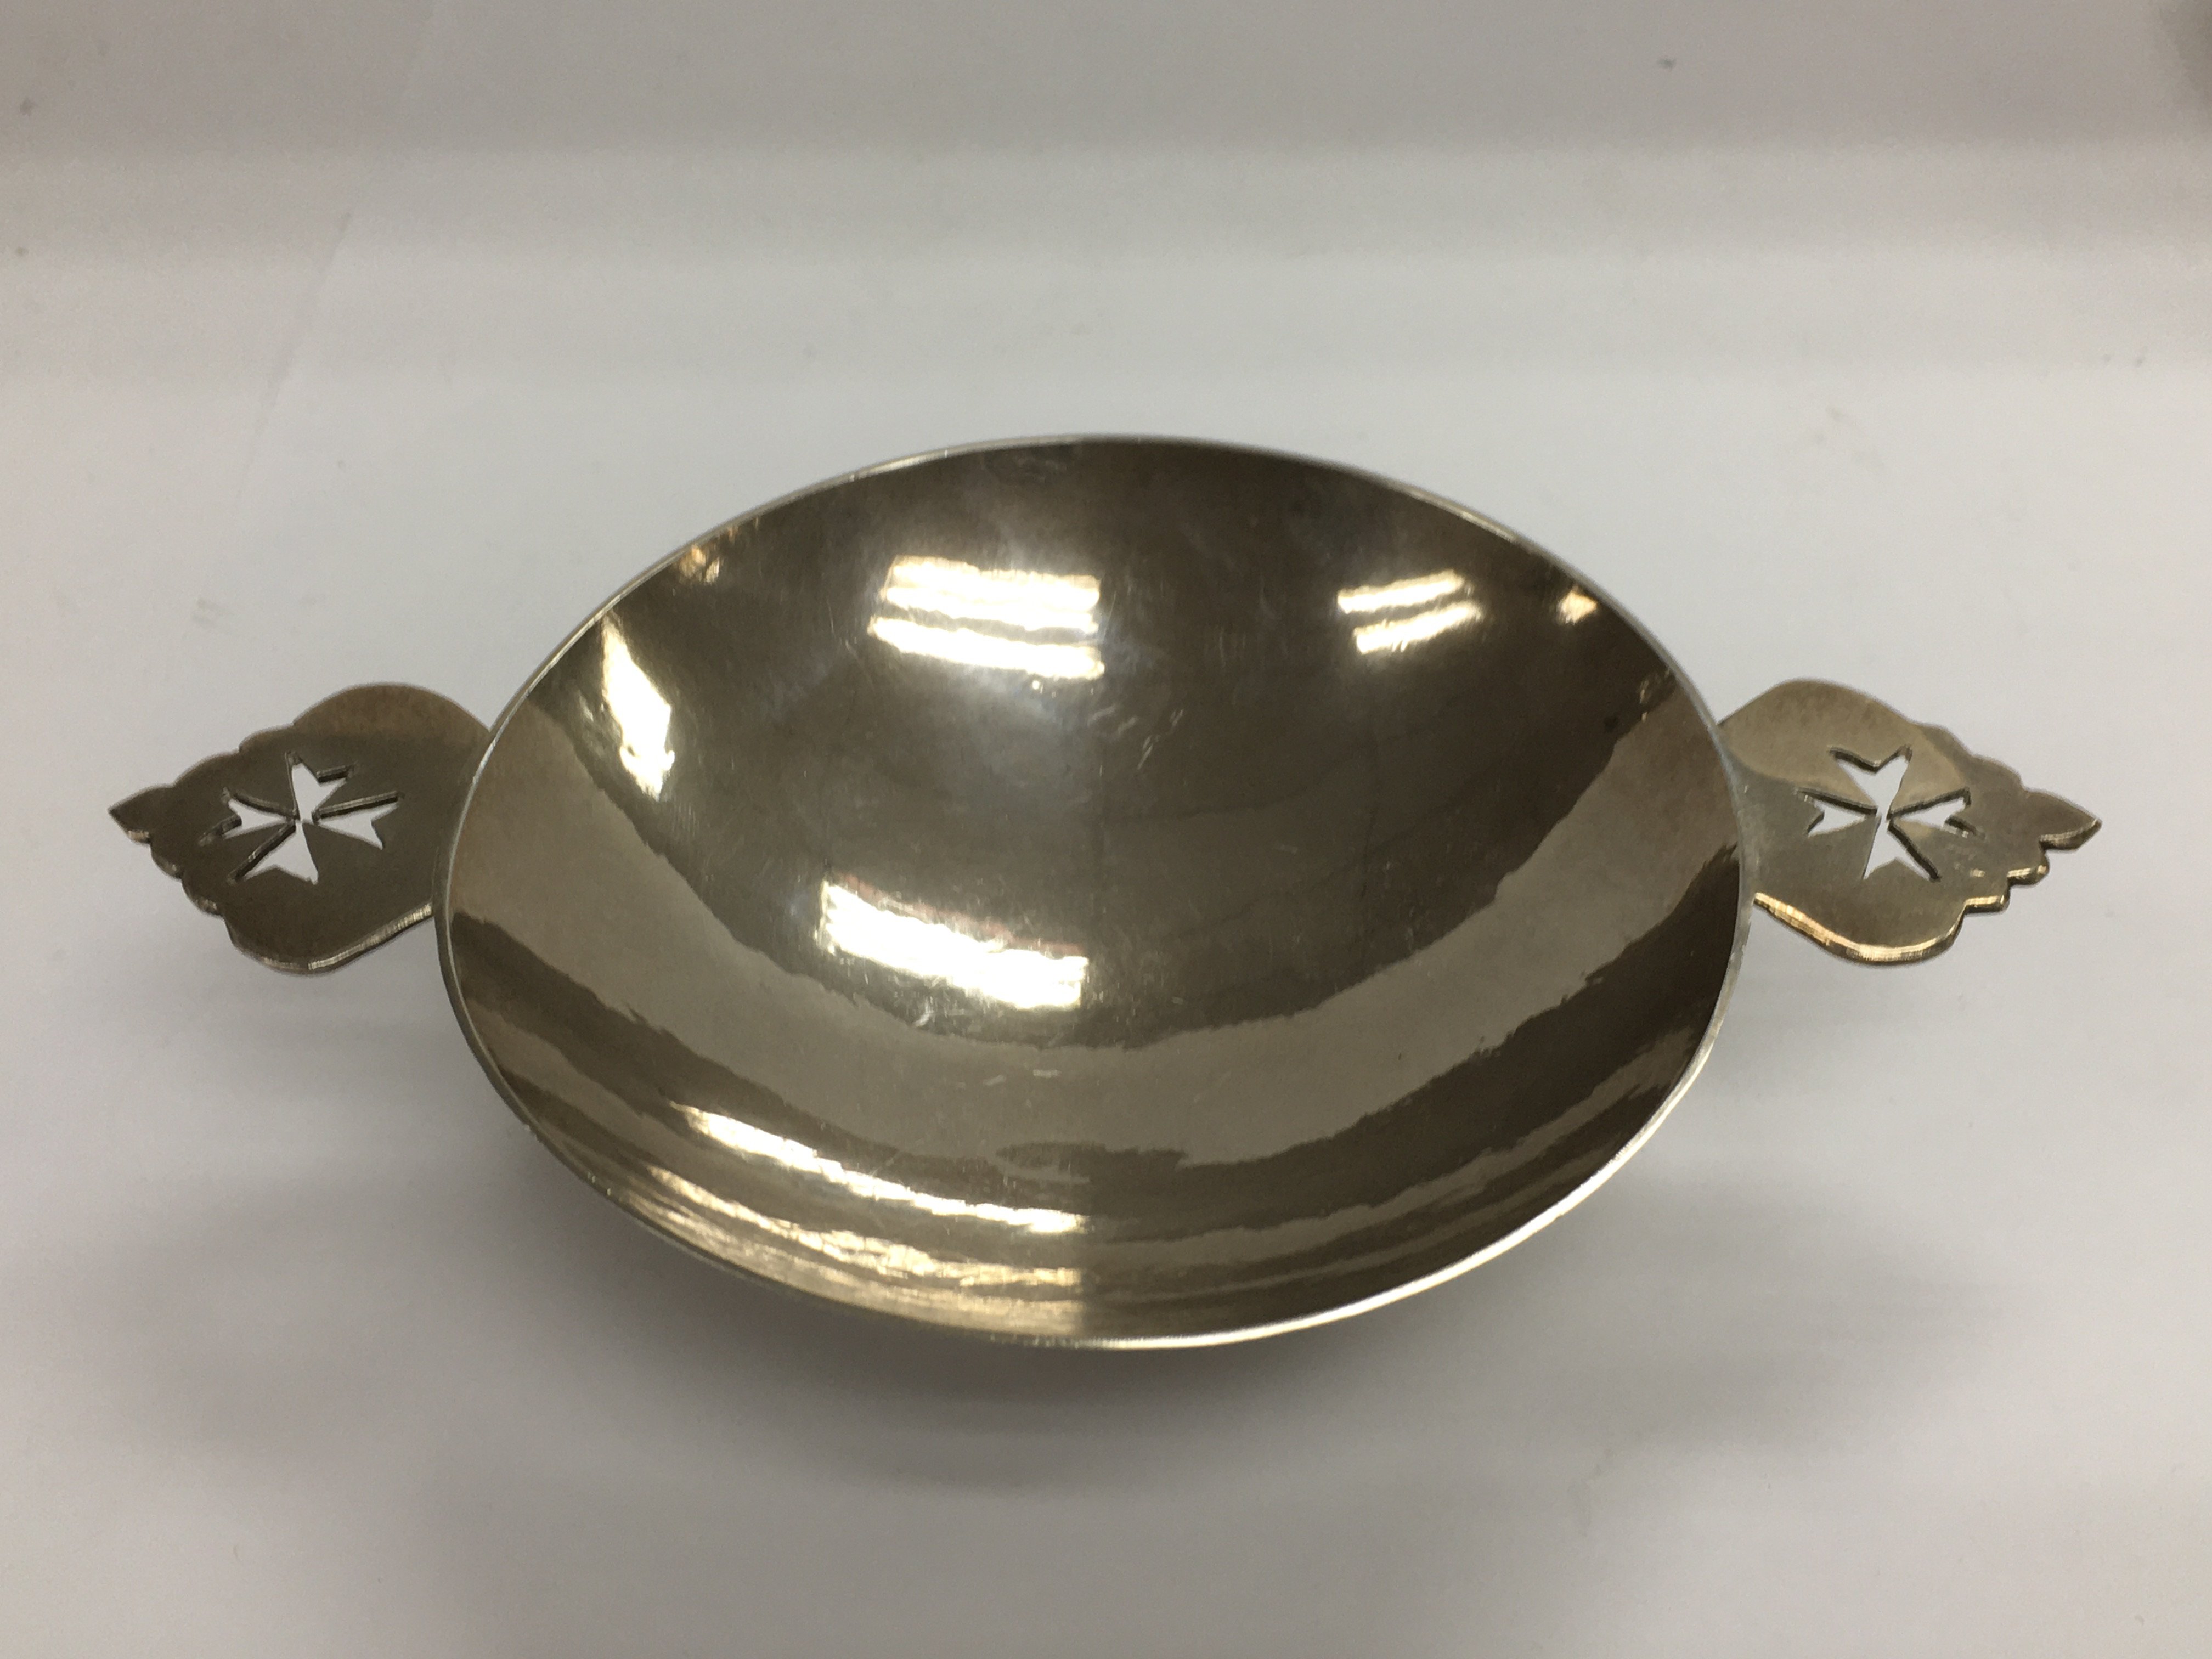 A silver bowl with handles